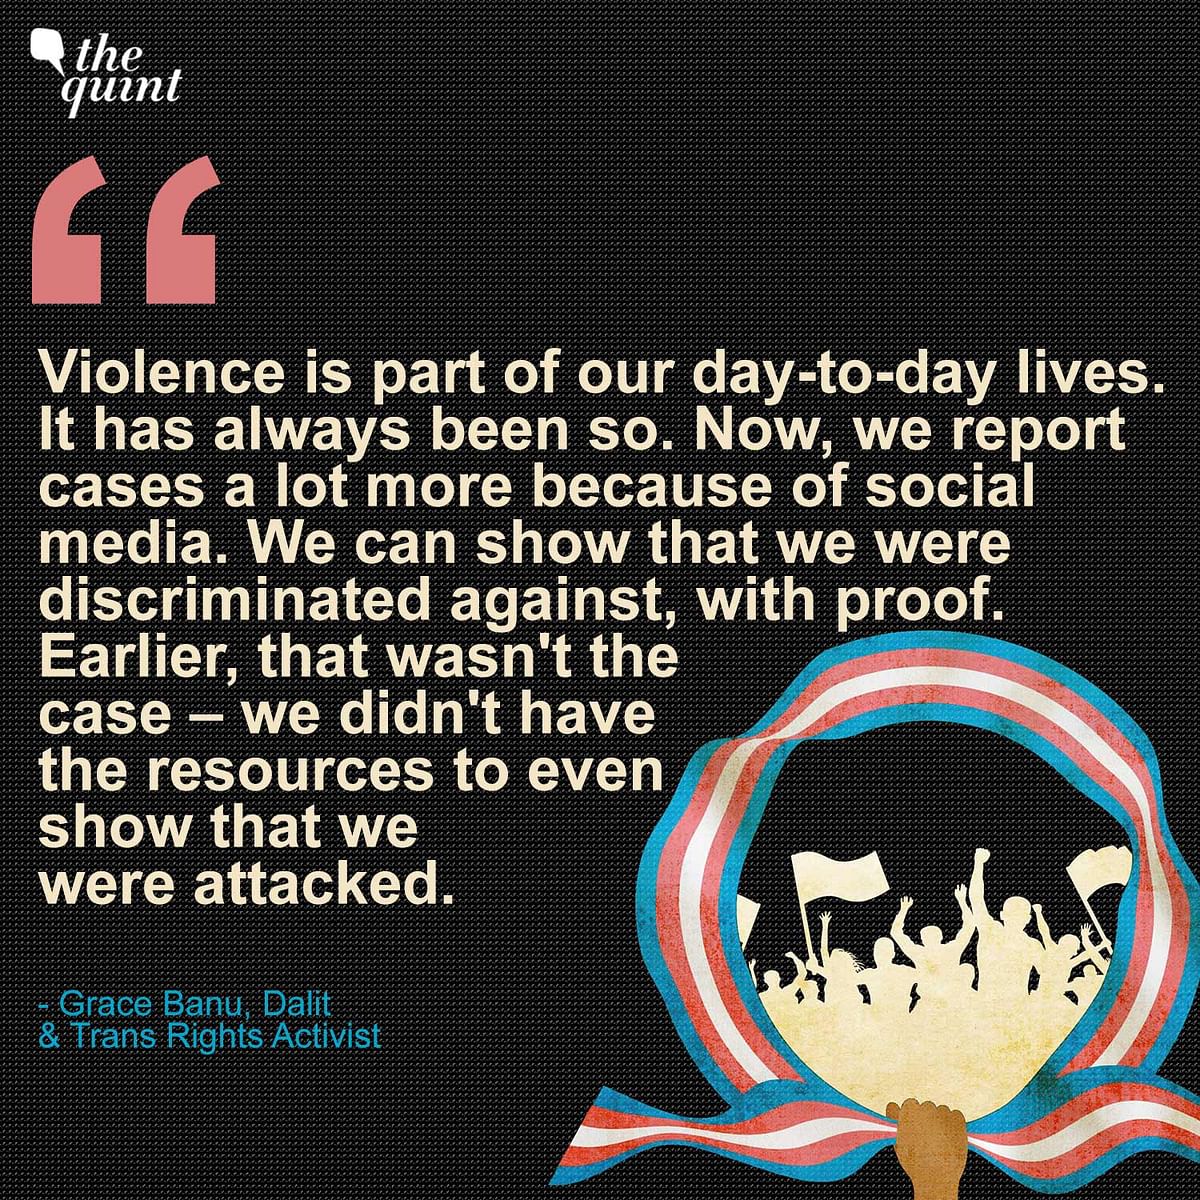 Violence against the community always existed; the recent attacks show that it's being reported more, say activists.